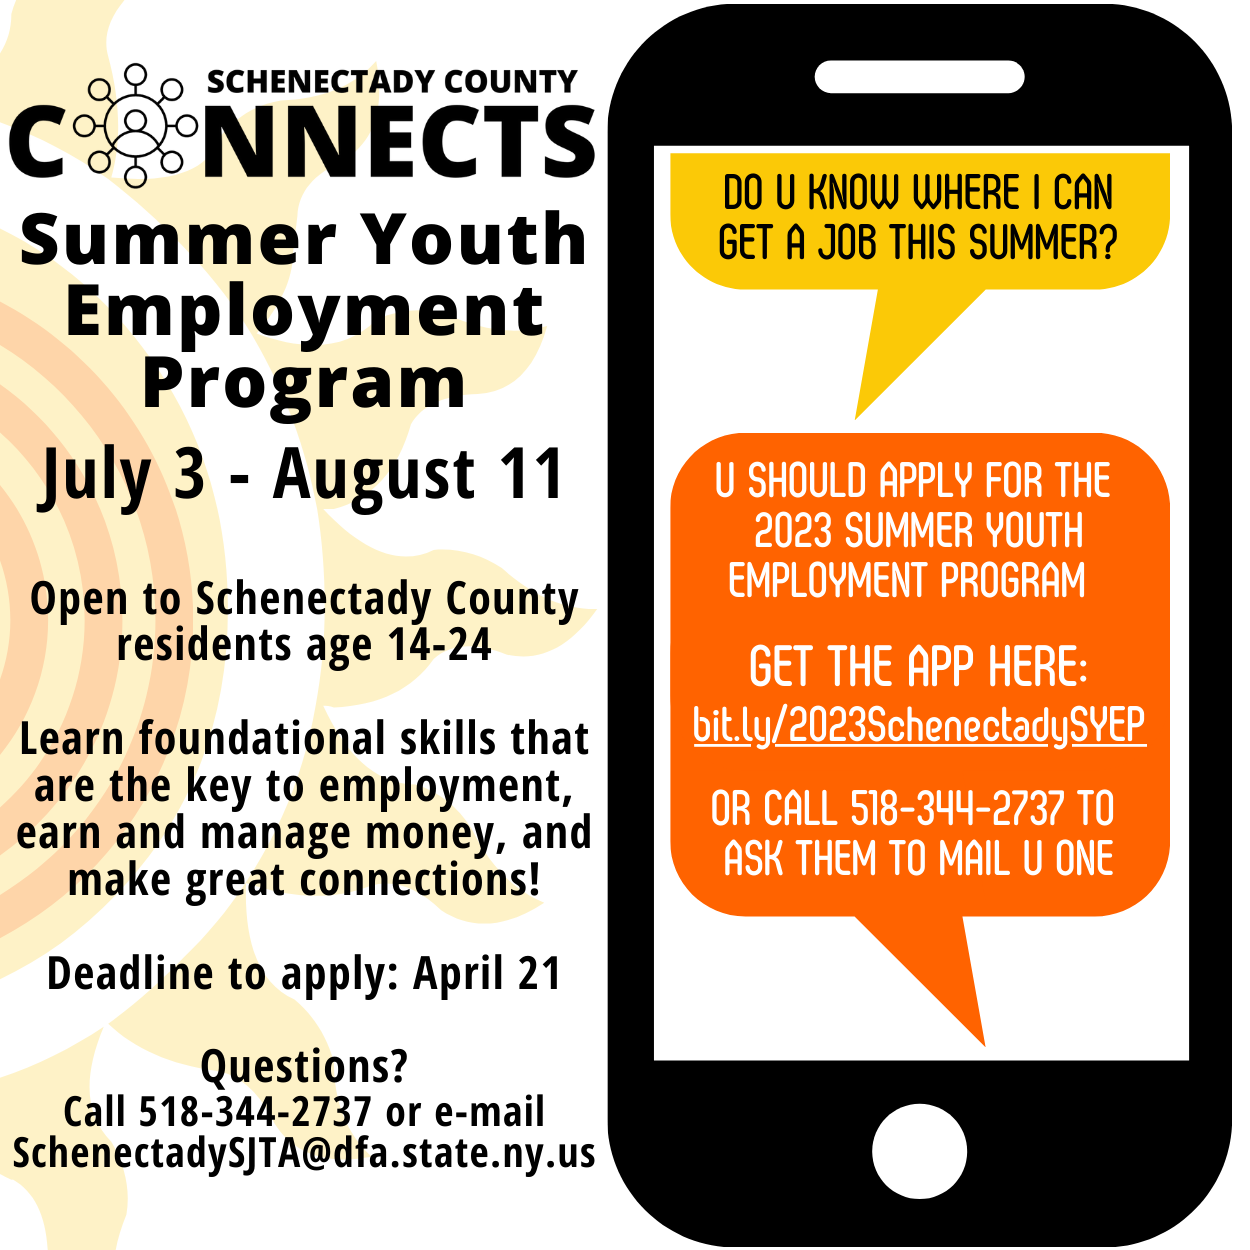 Summer Youth Employeement Program. July 3- August 11. Open to Schenectady County residents age 14-24. Deadline to apply is April 21, 2023. Click to learn more.